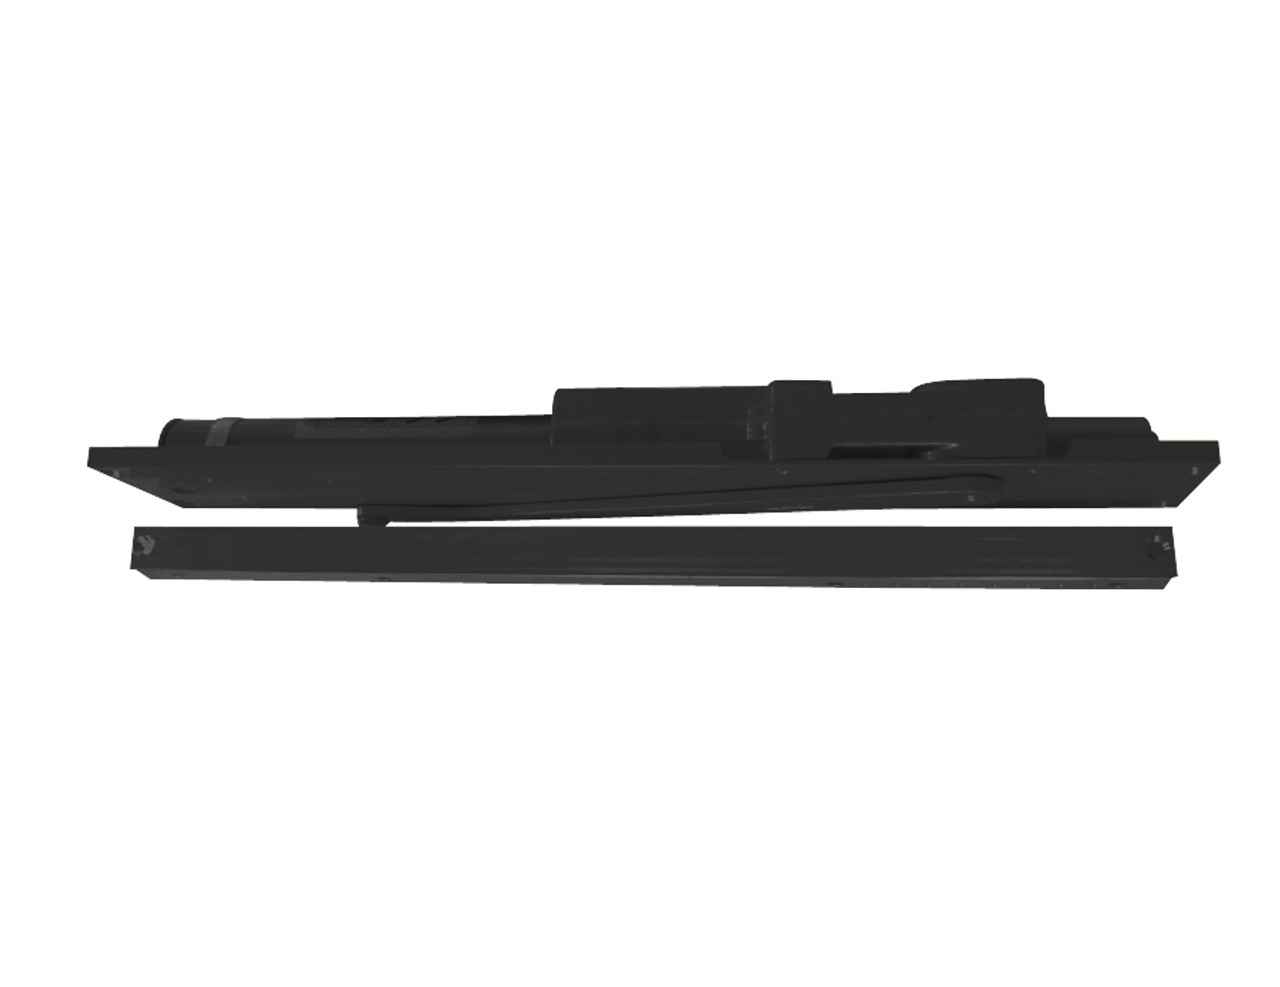 5033-H-LH-BLACK LCN Door Closer with Hold Open Arm in Black Finish